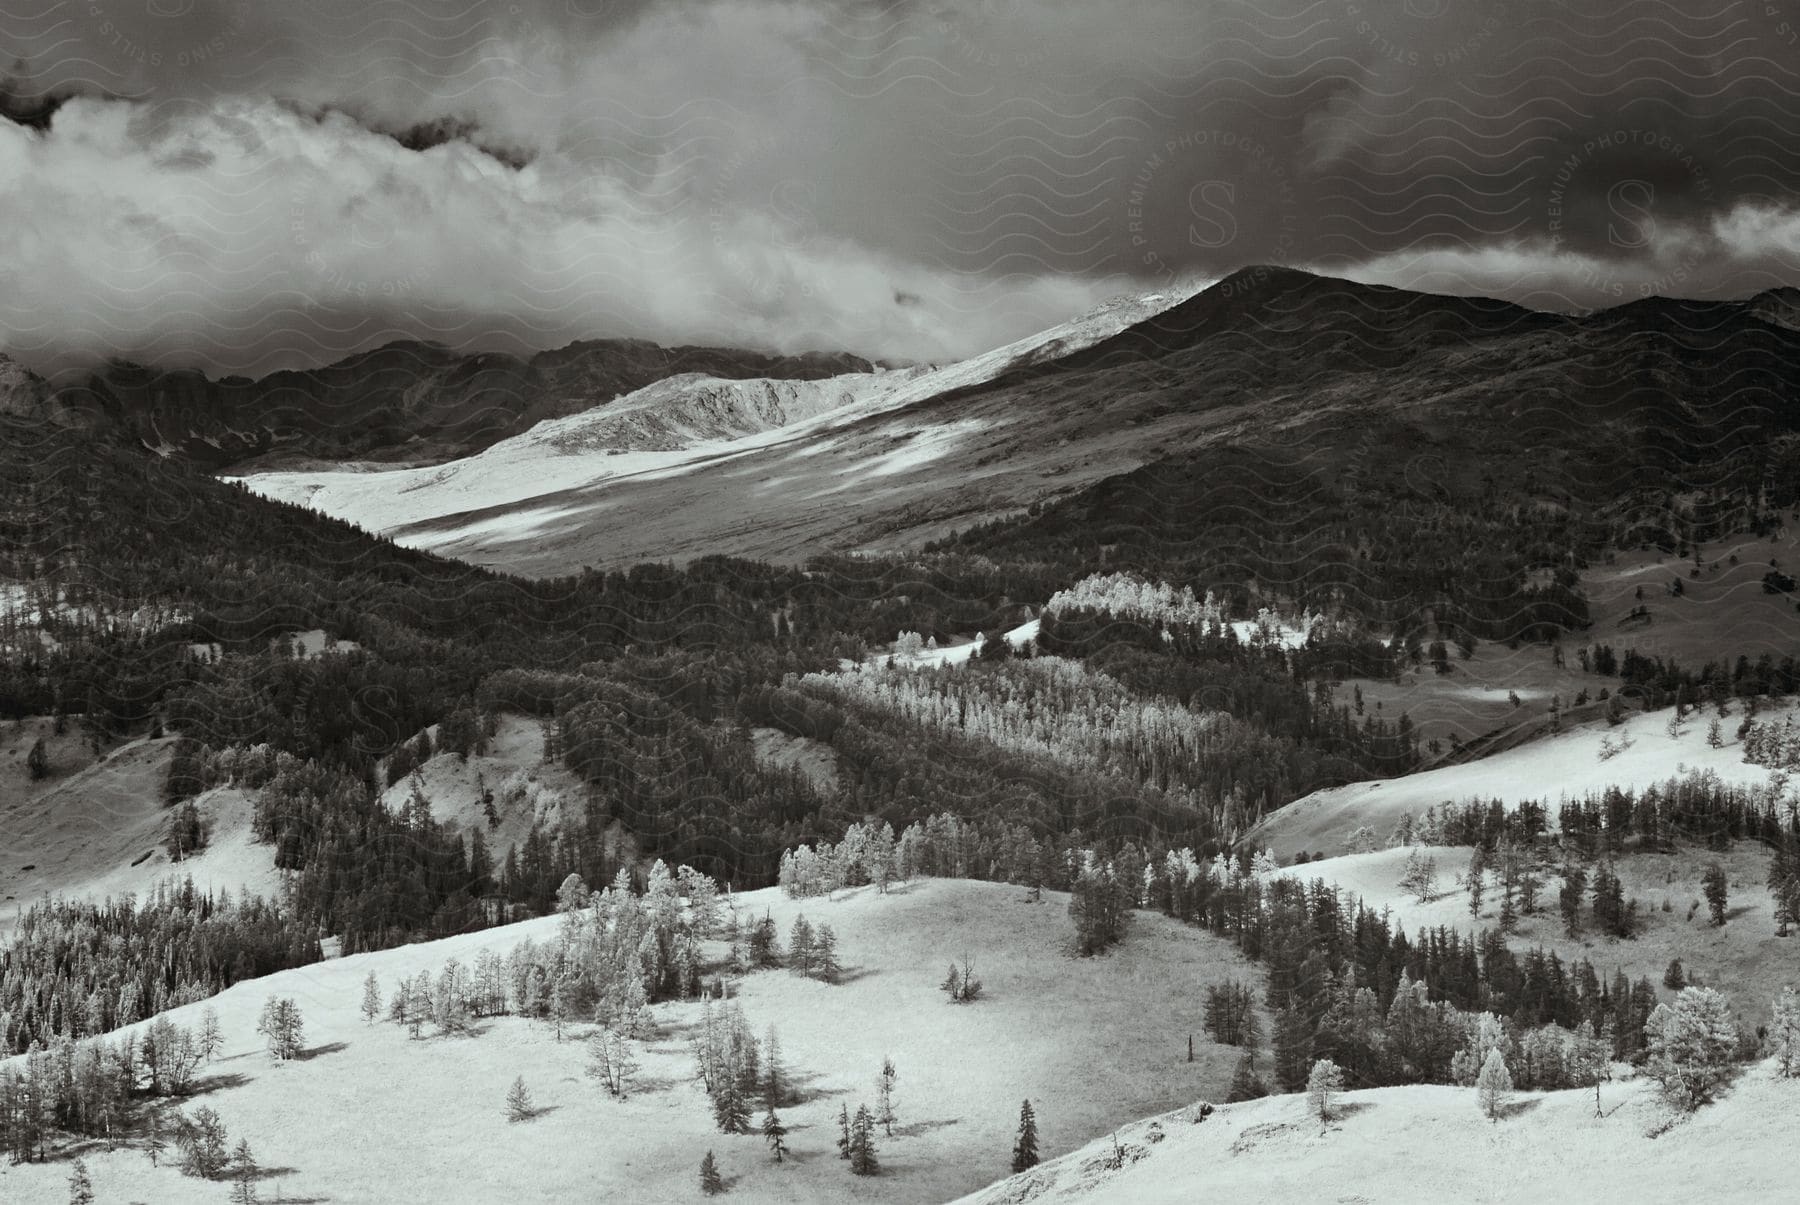 Snowy mountains and forests on a cloudy day